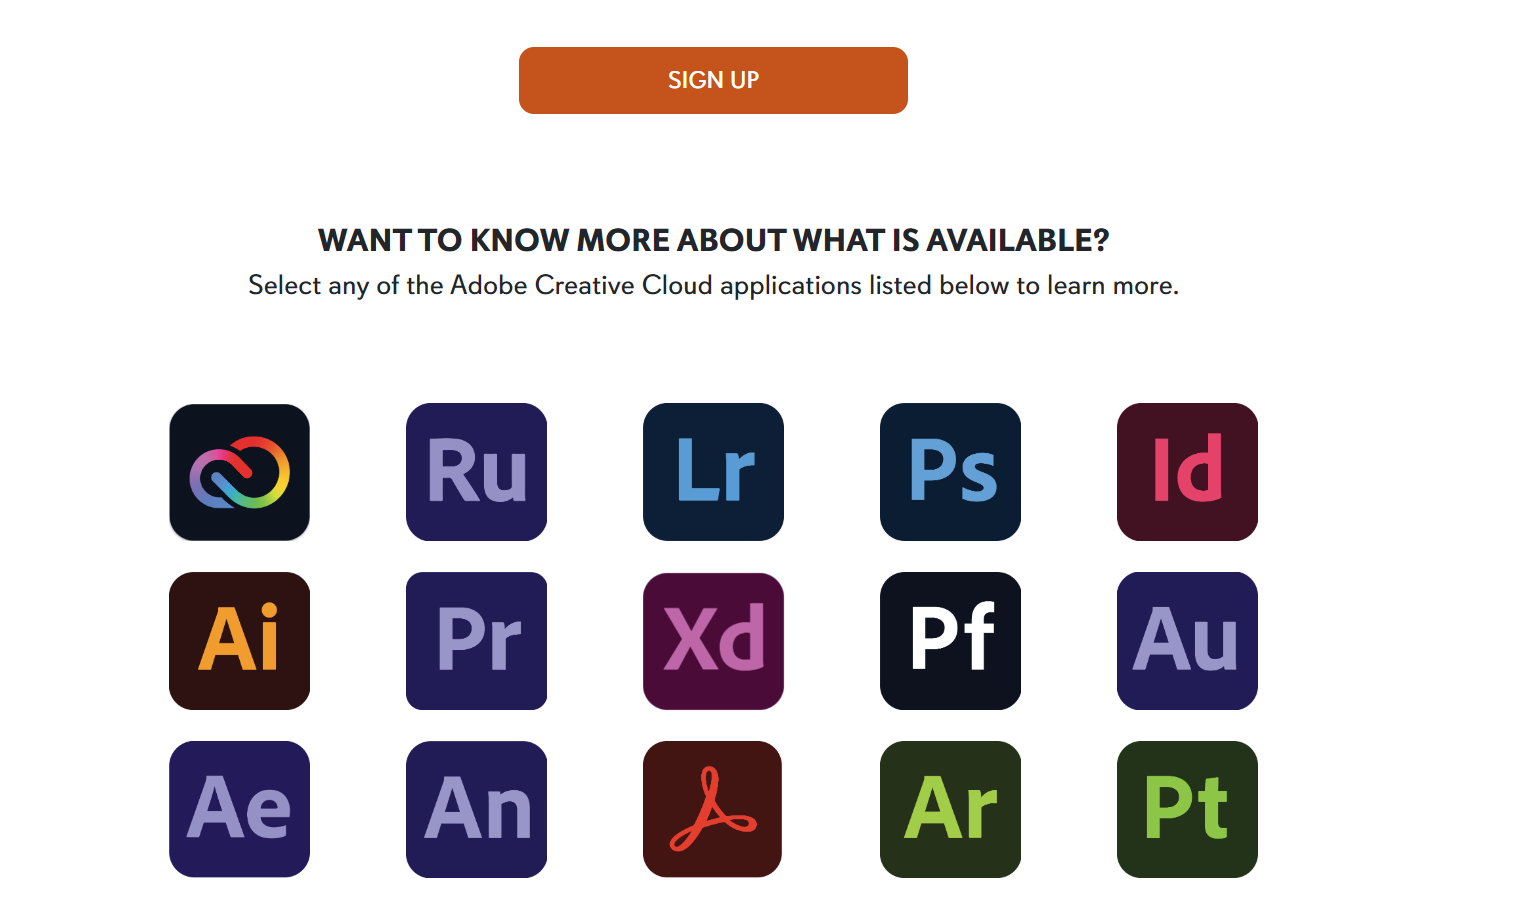 Adobe Sign Up Button